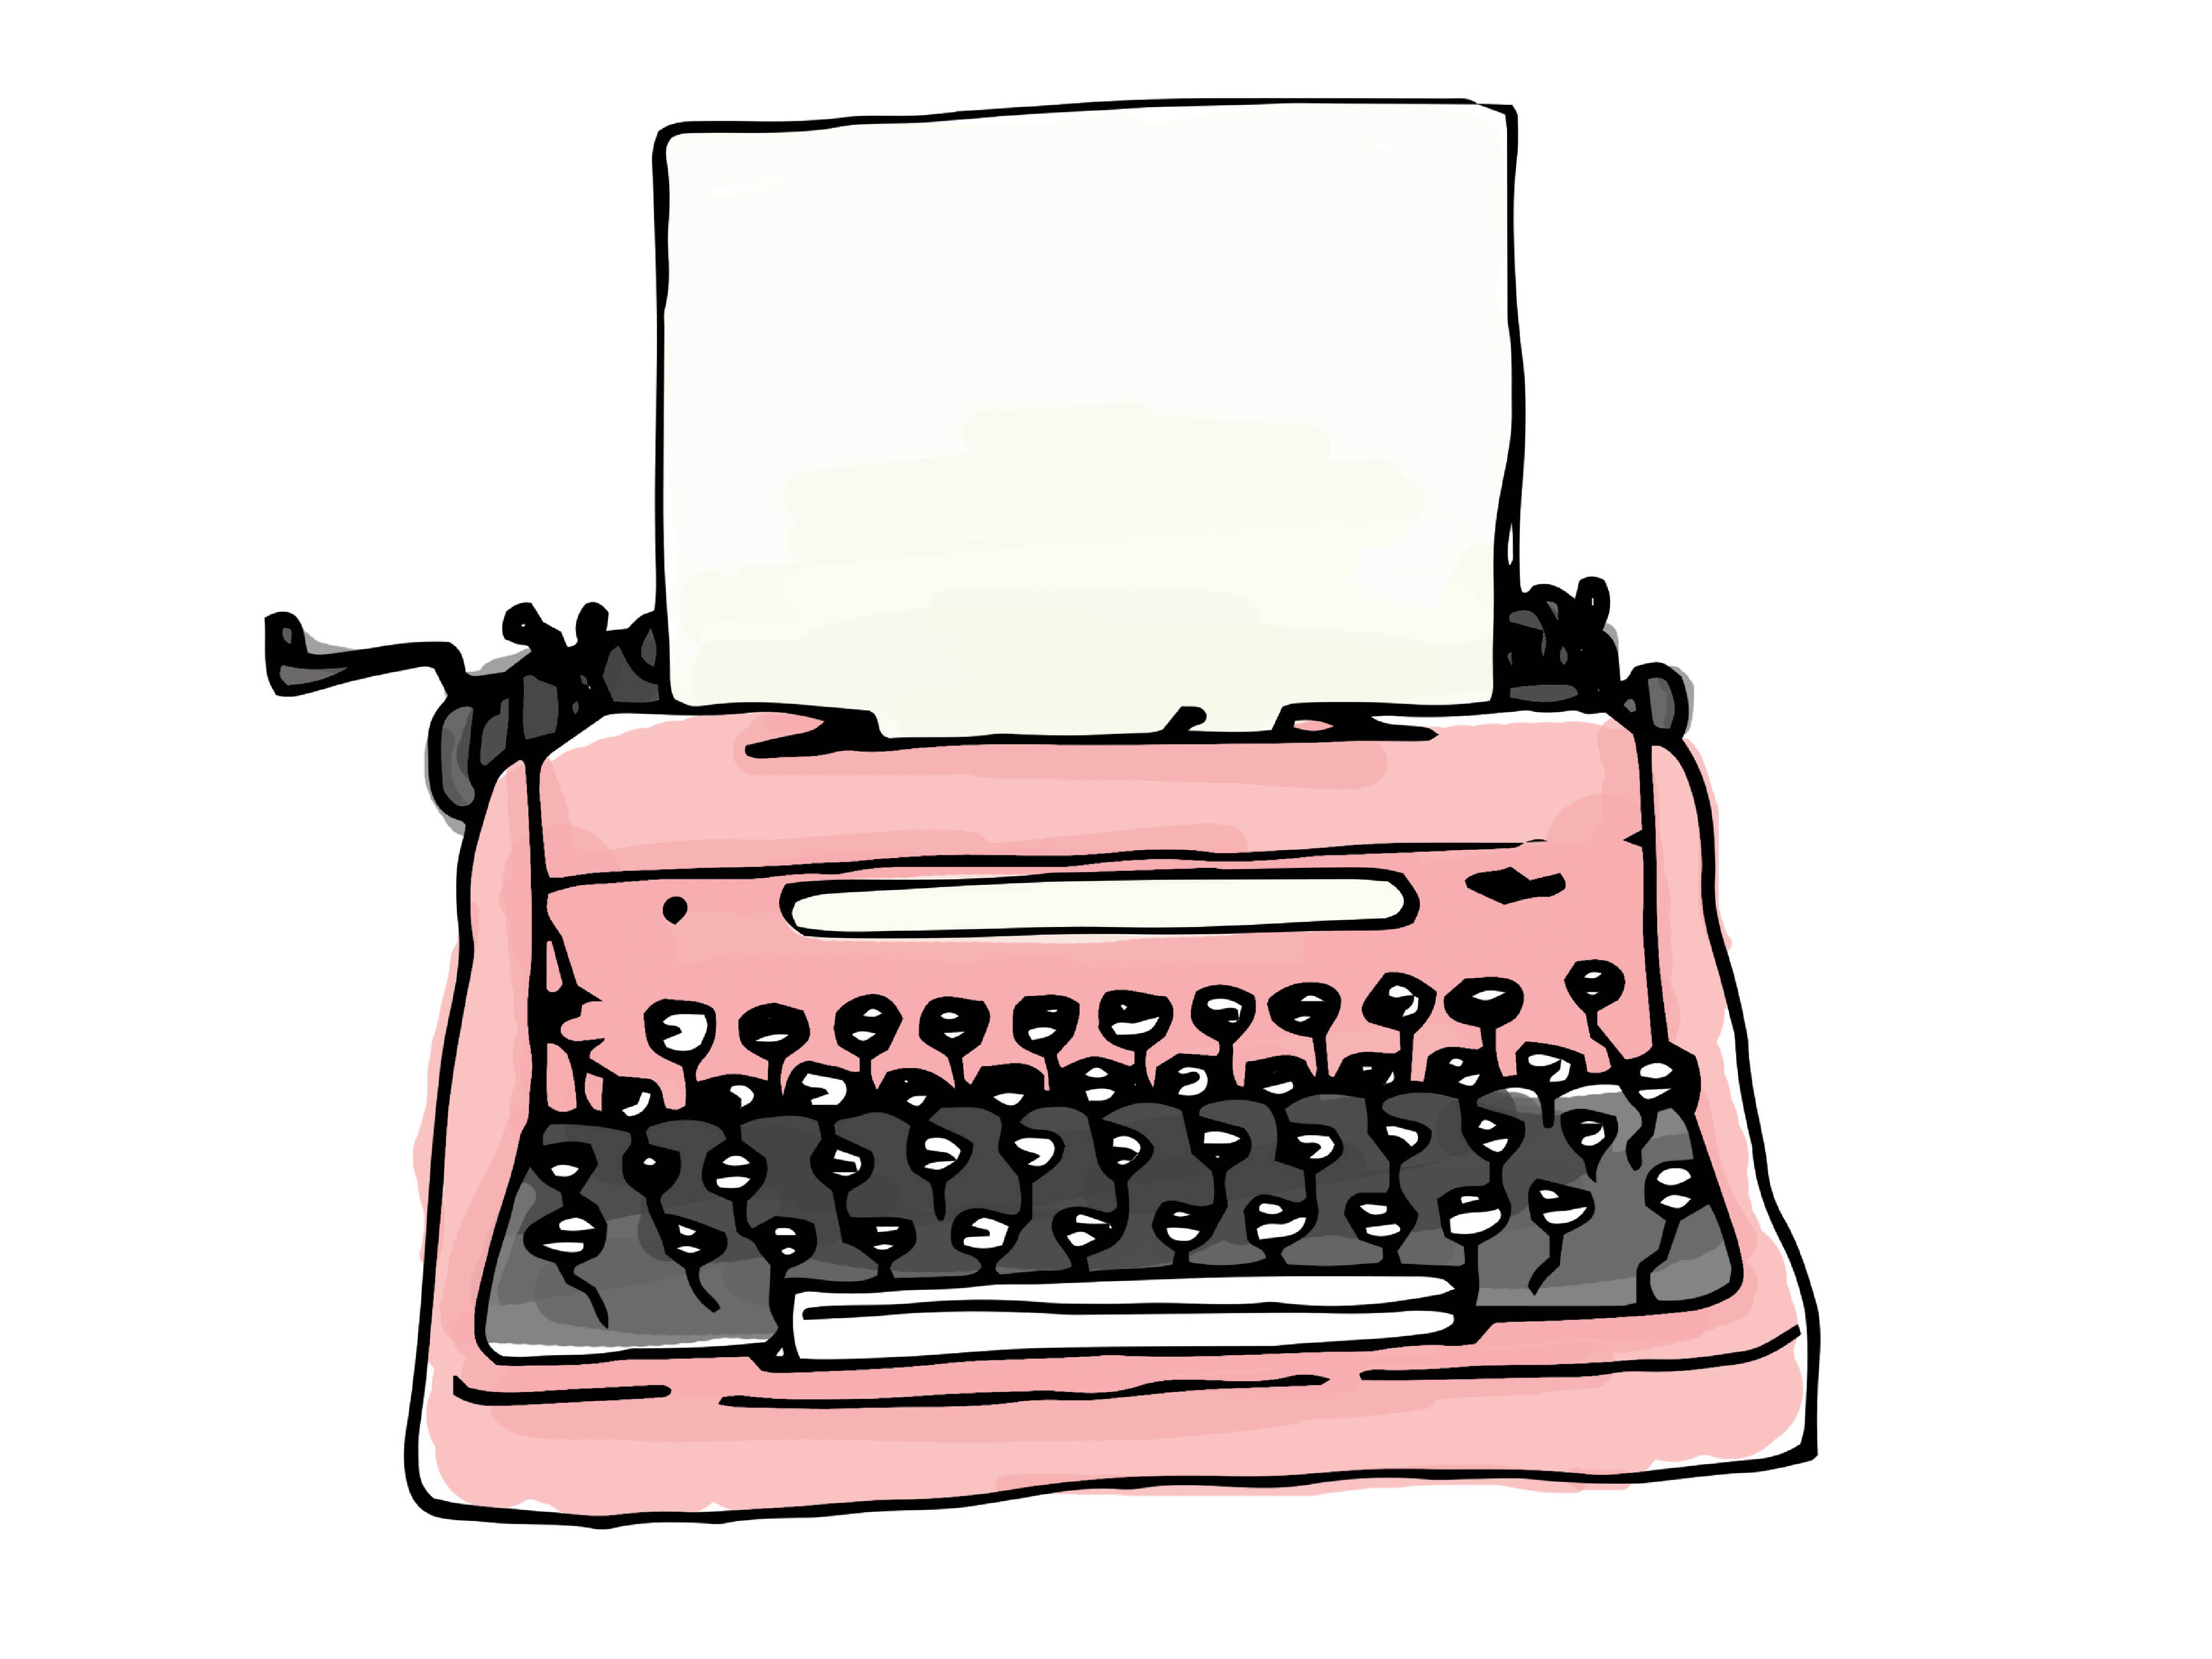 Typewriter Drawing at GetDrawings.com | Free for personal use ...